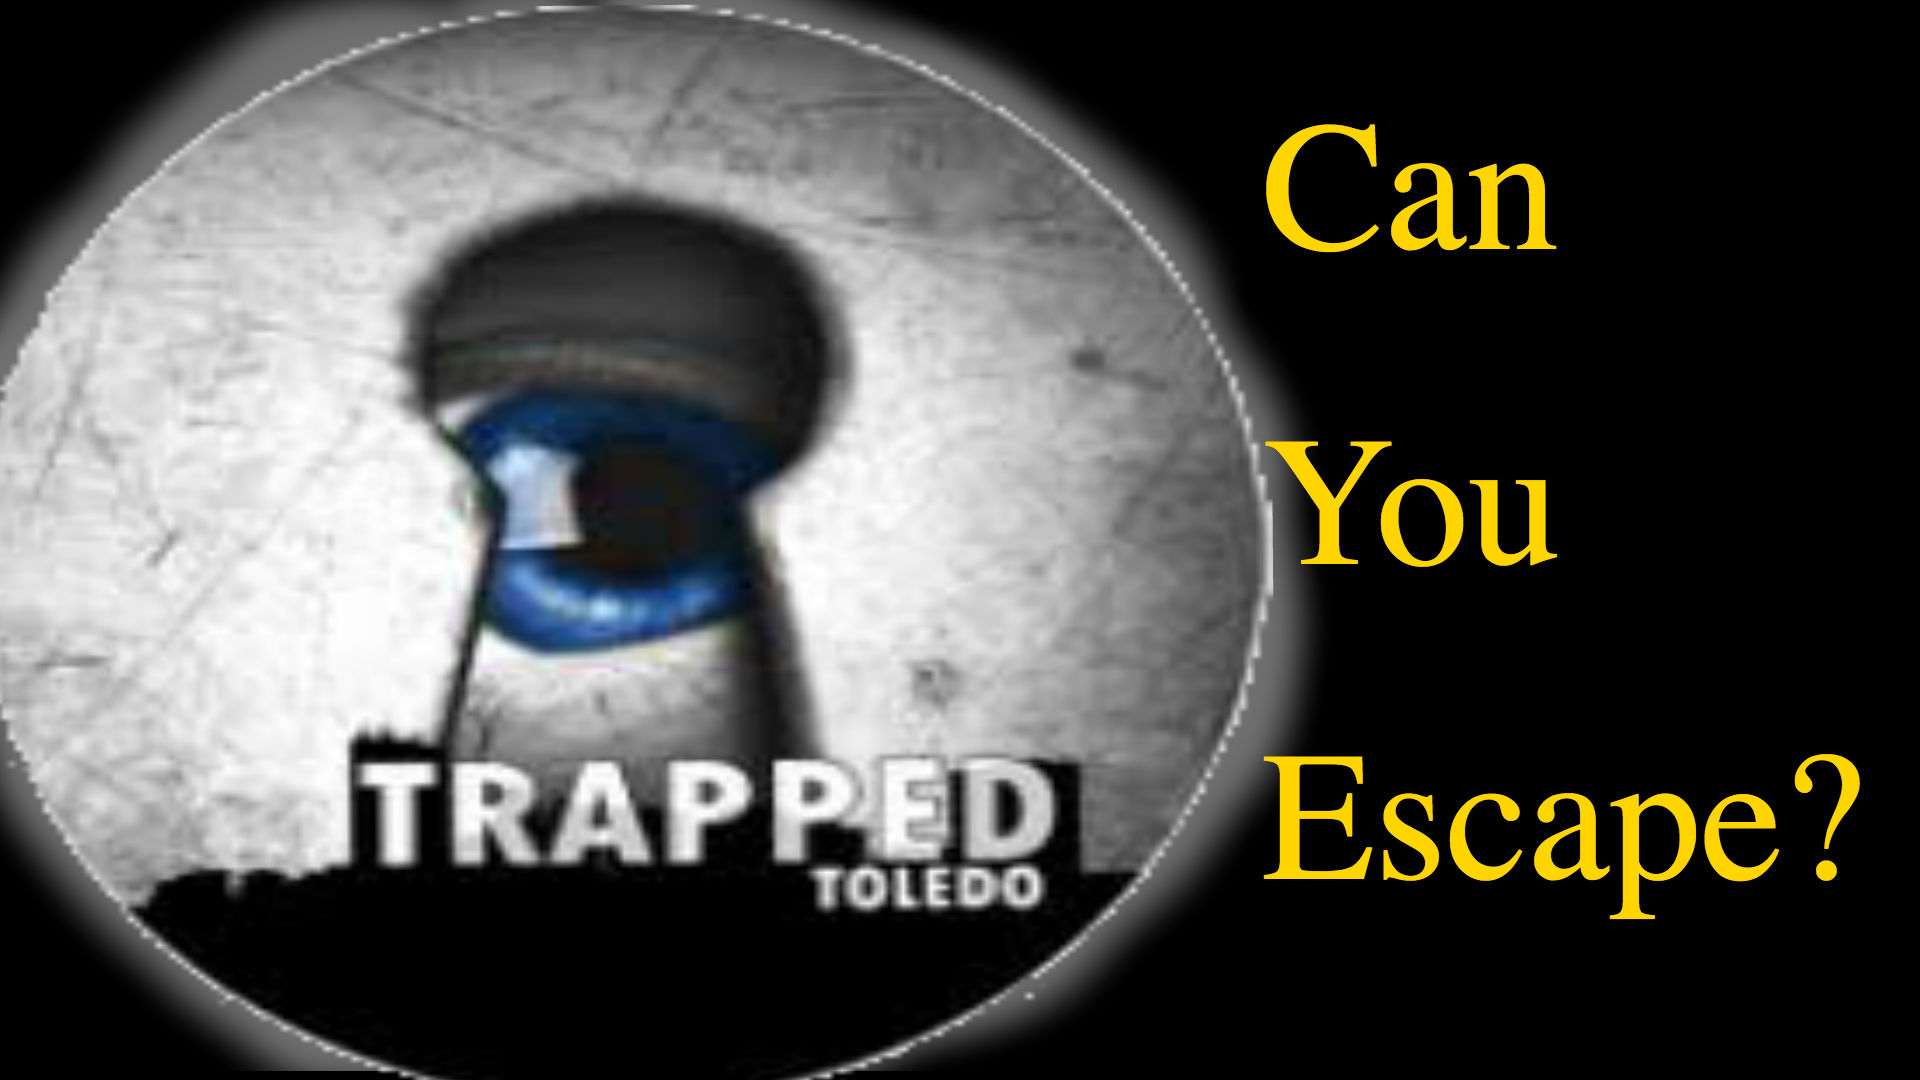 Trapped Toledo: Think You Can Escape?